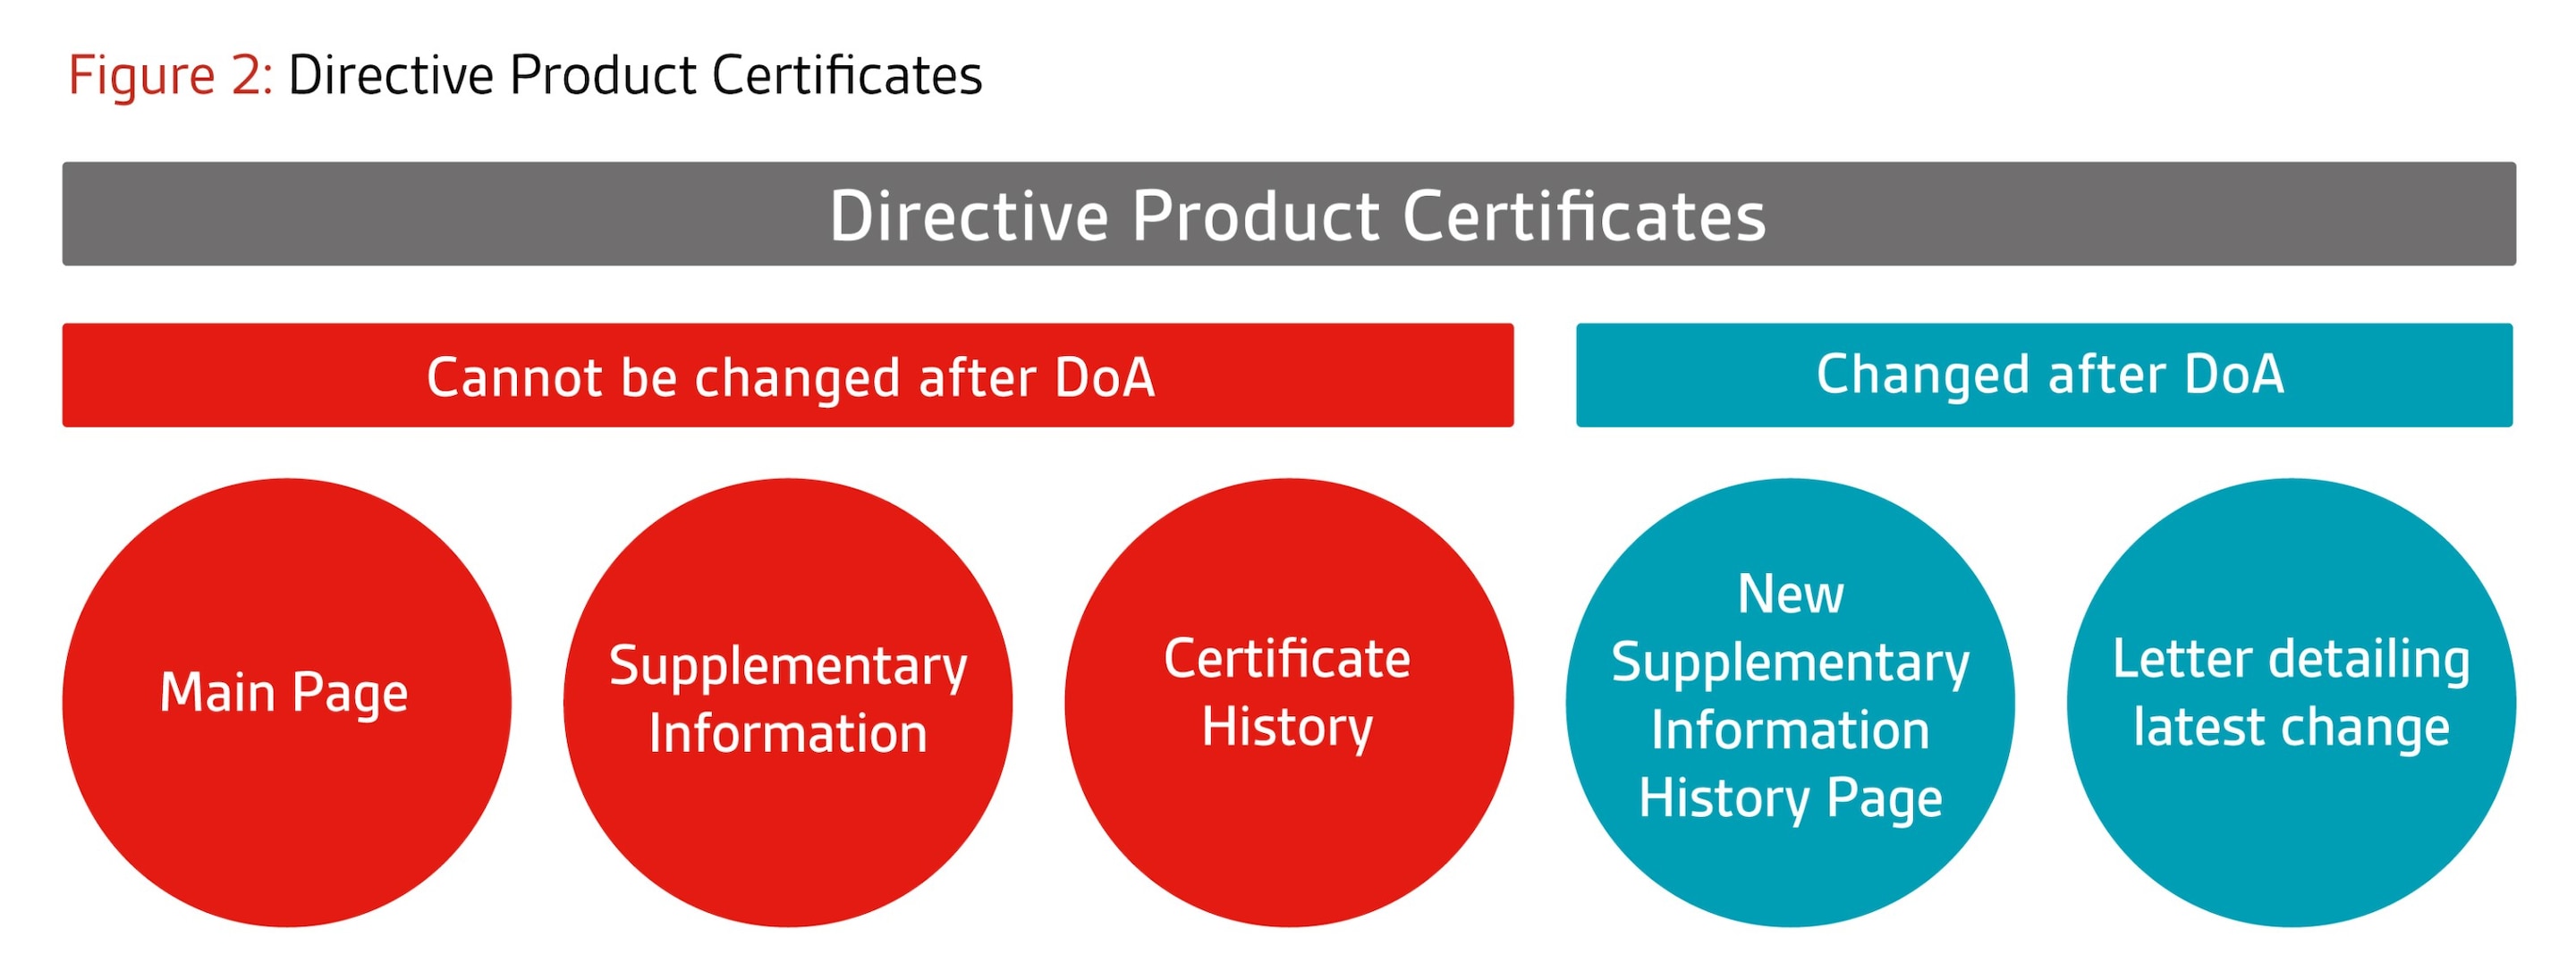 Certificates based on product annexes (e.g. design exam certificates)